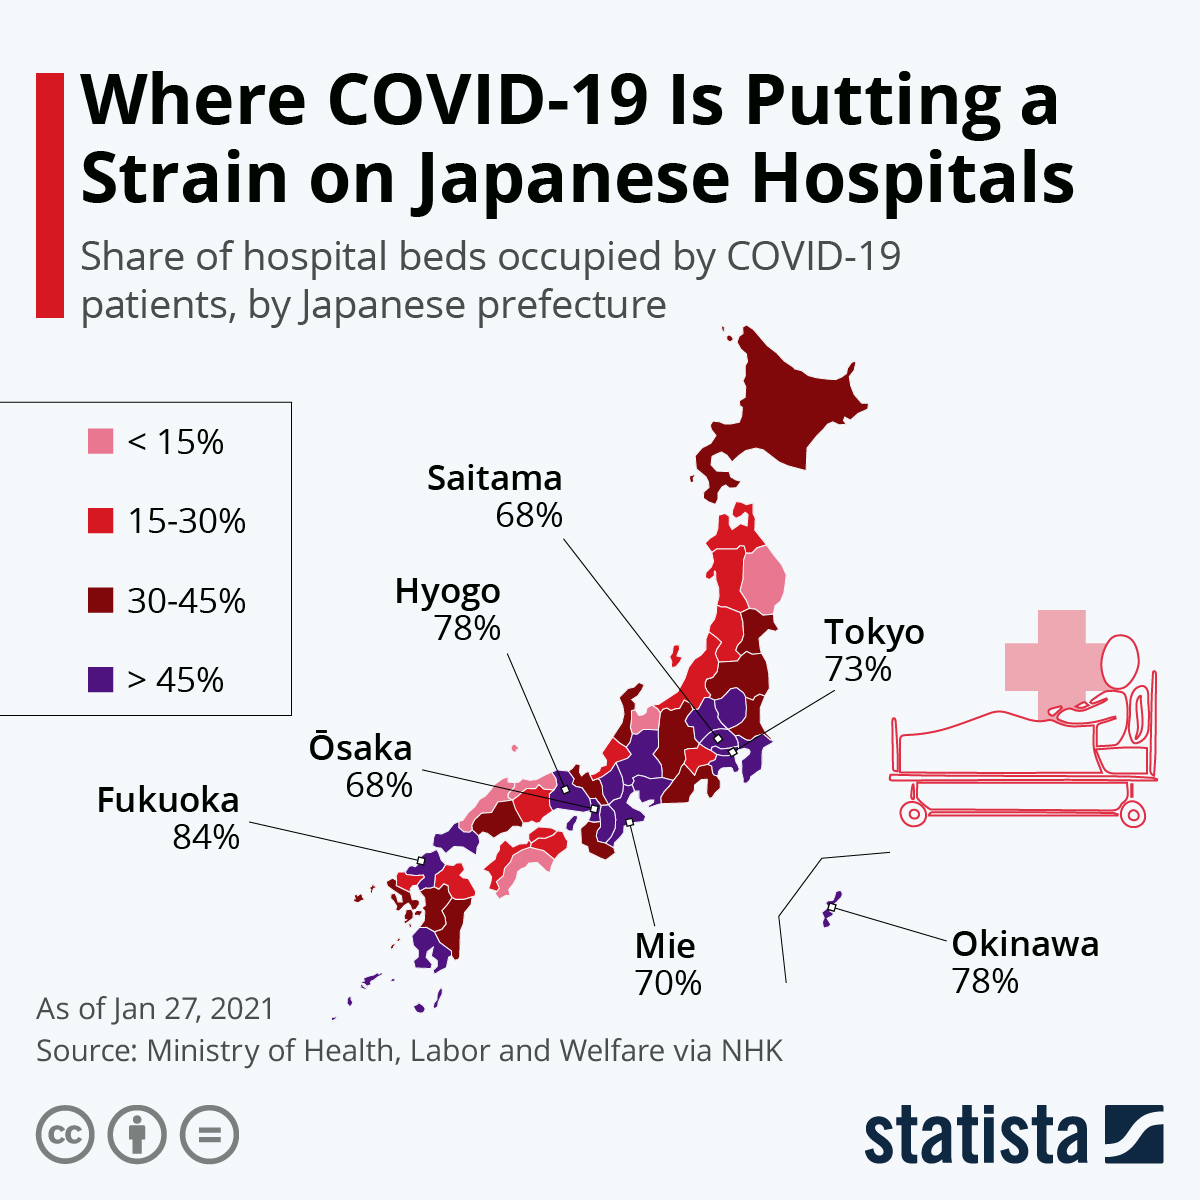 Where COVID-19 Is Putting a Strain on Japanese Hospitals